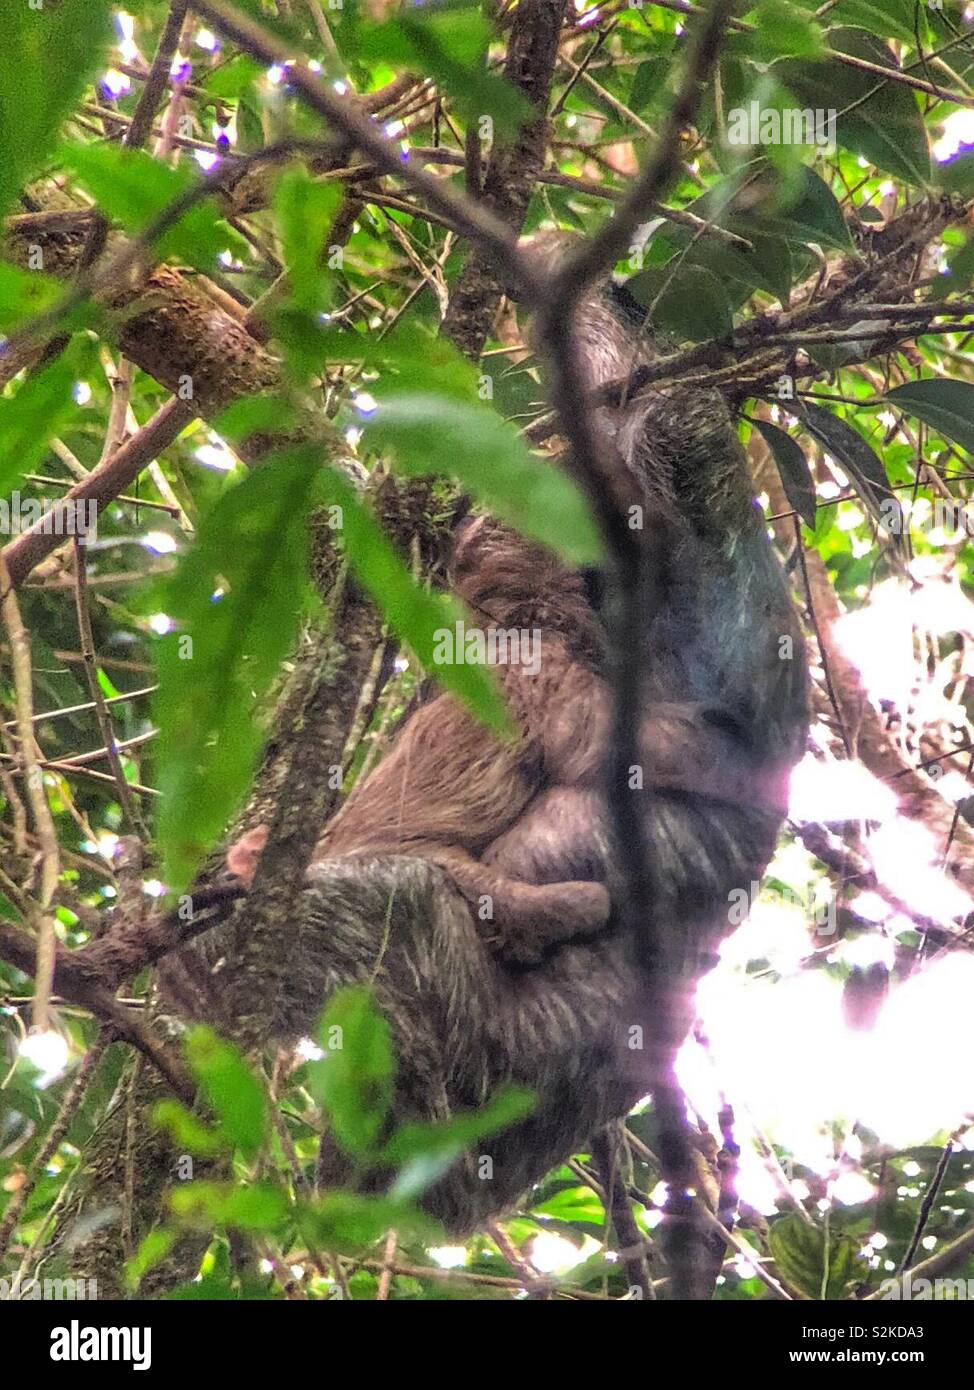 A baby sloth clings to its mother in a tree. Stock Photo